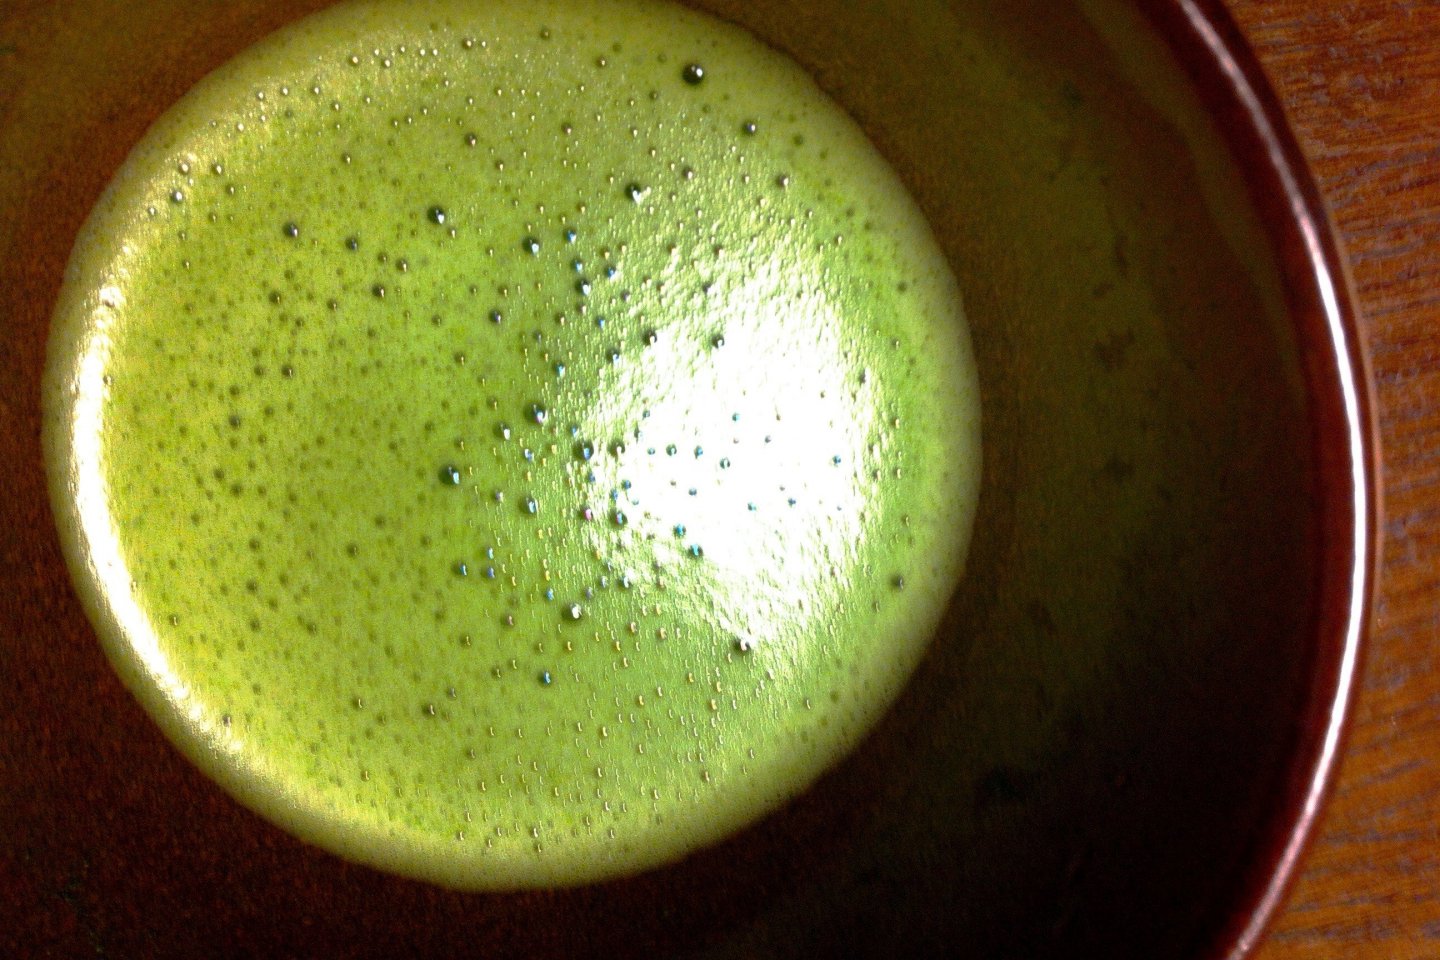 Emi's matcha tea is equally as exquisite